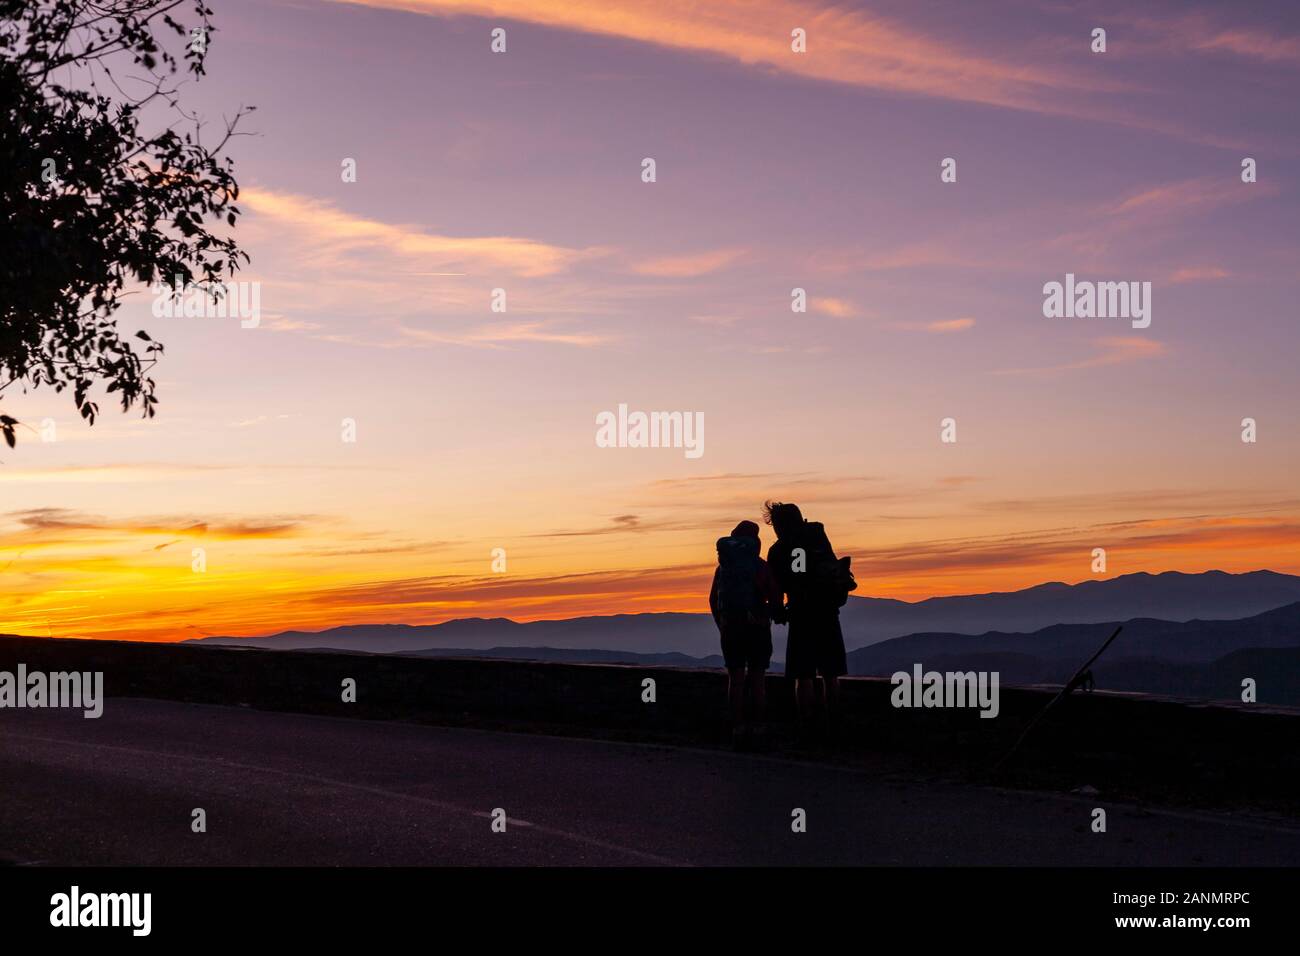 A couple watches the sunrise. History and drama play out in O Cebreiro Spain with dramatic Galician Landscapes. El Camino de Santiago, Spain. Stock Photo